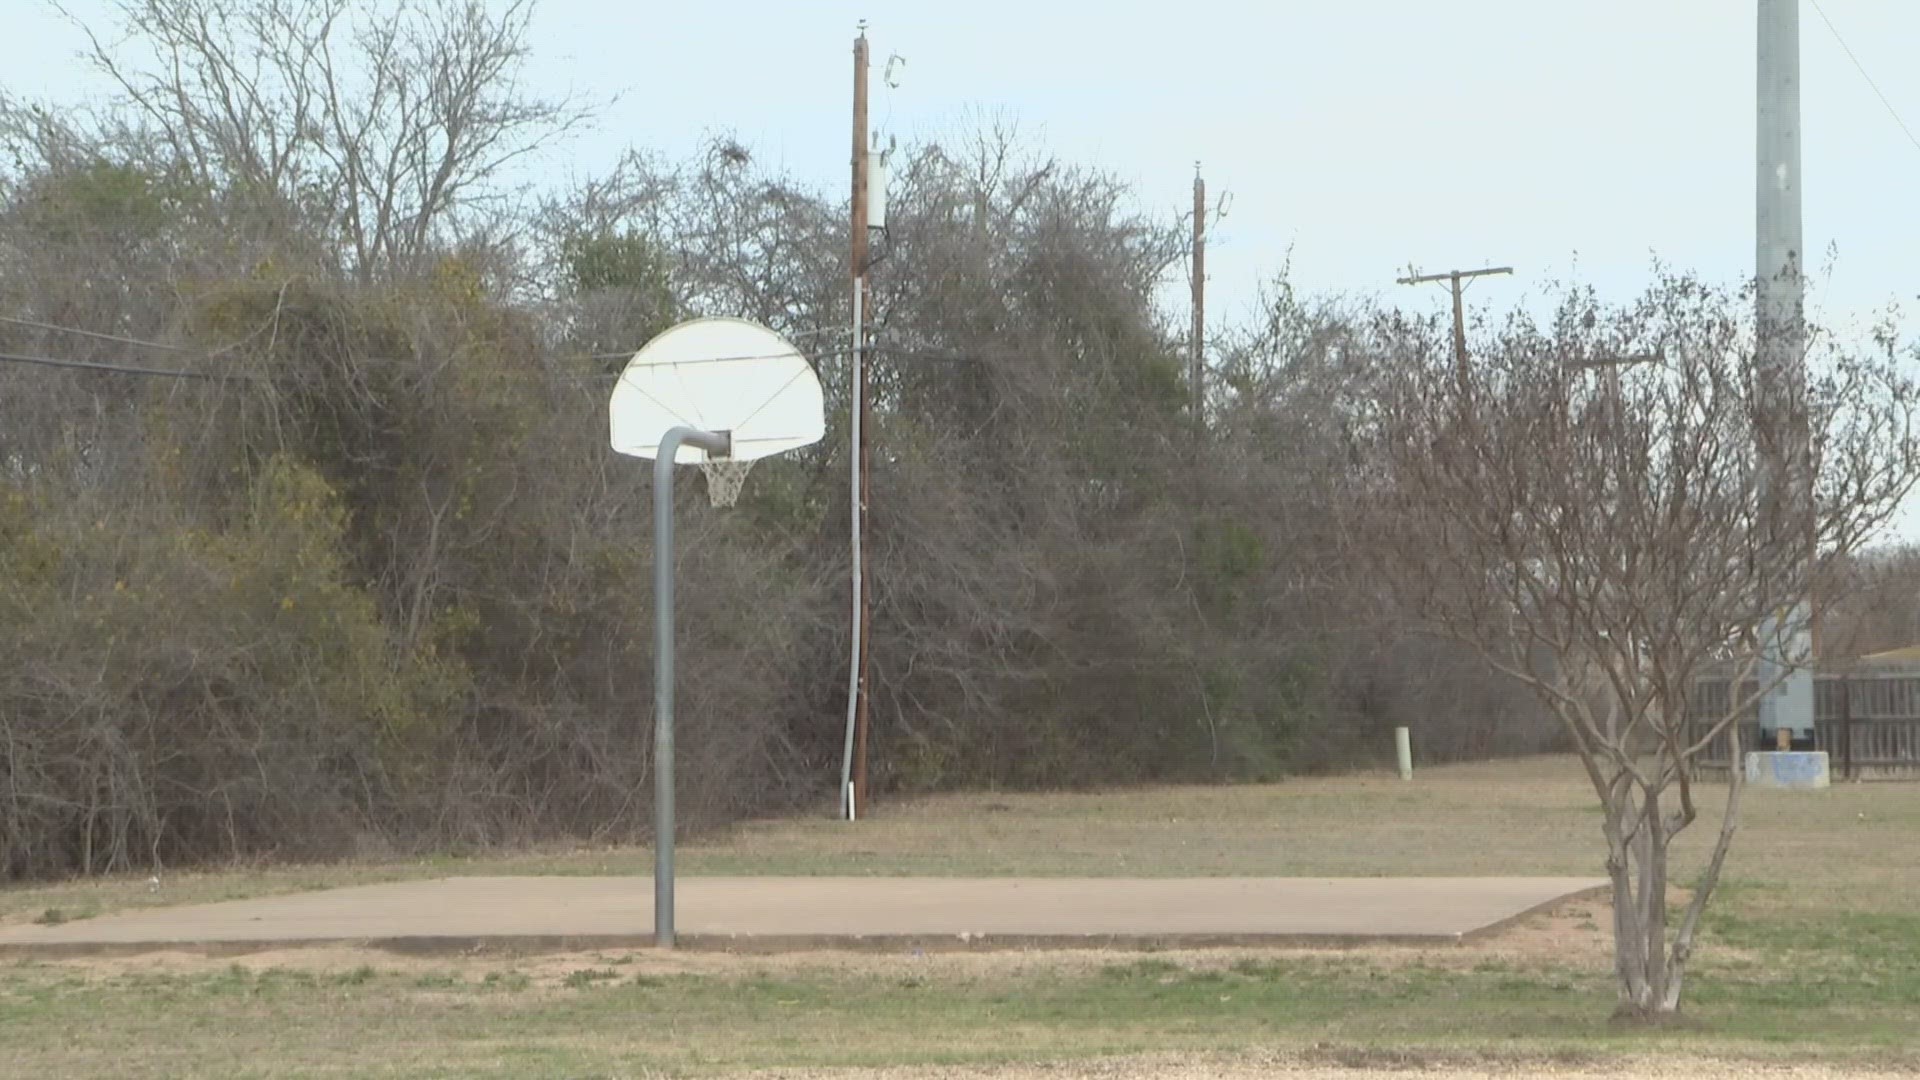 Killeen's Parks and Recreation Department says the City's Adopt-A-Park Program is thriving, with over 20 groups having adopted parks so far.